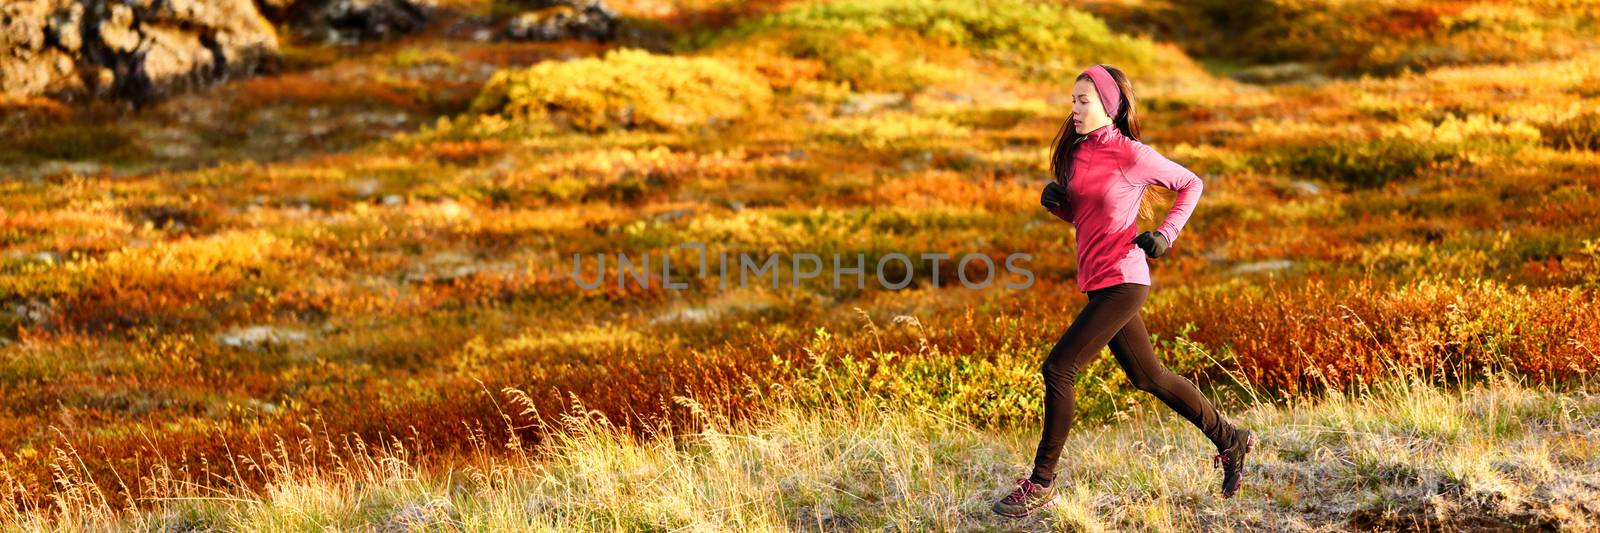 Healthy active lifestyle trail running athlete woman training outdoors doing cardio exercise in autumn foliage background. Panoramic banner.